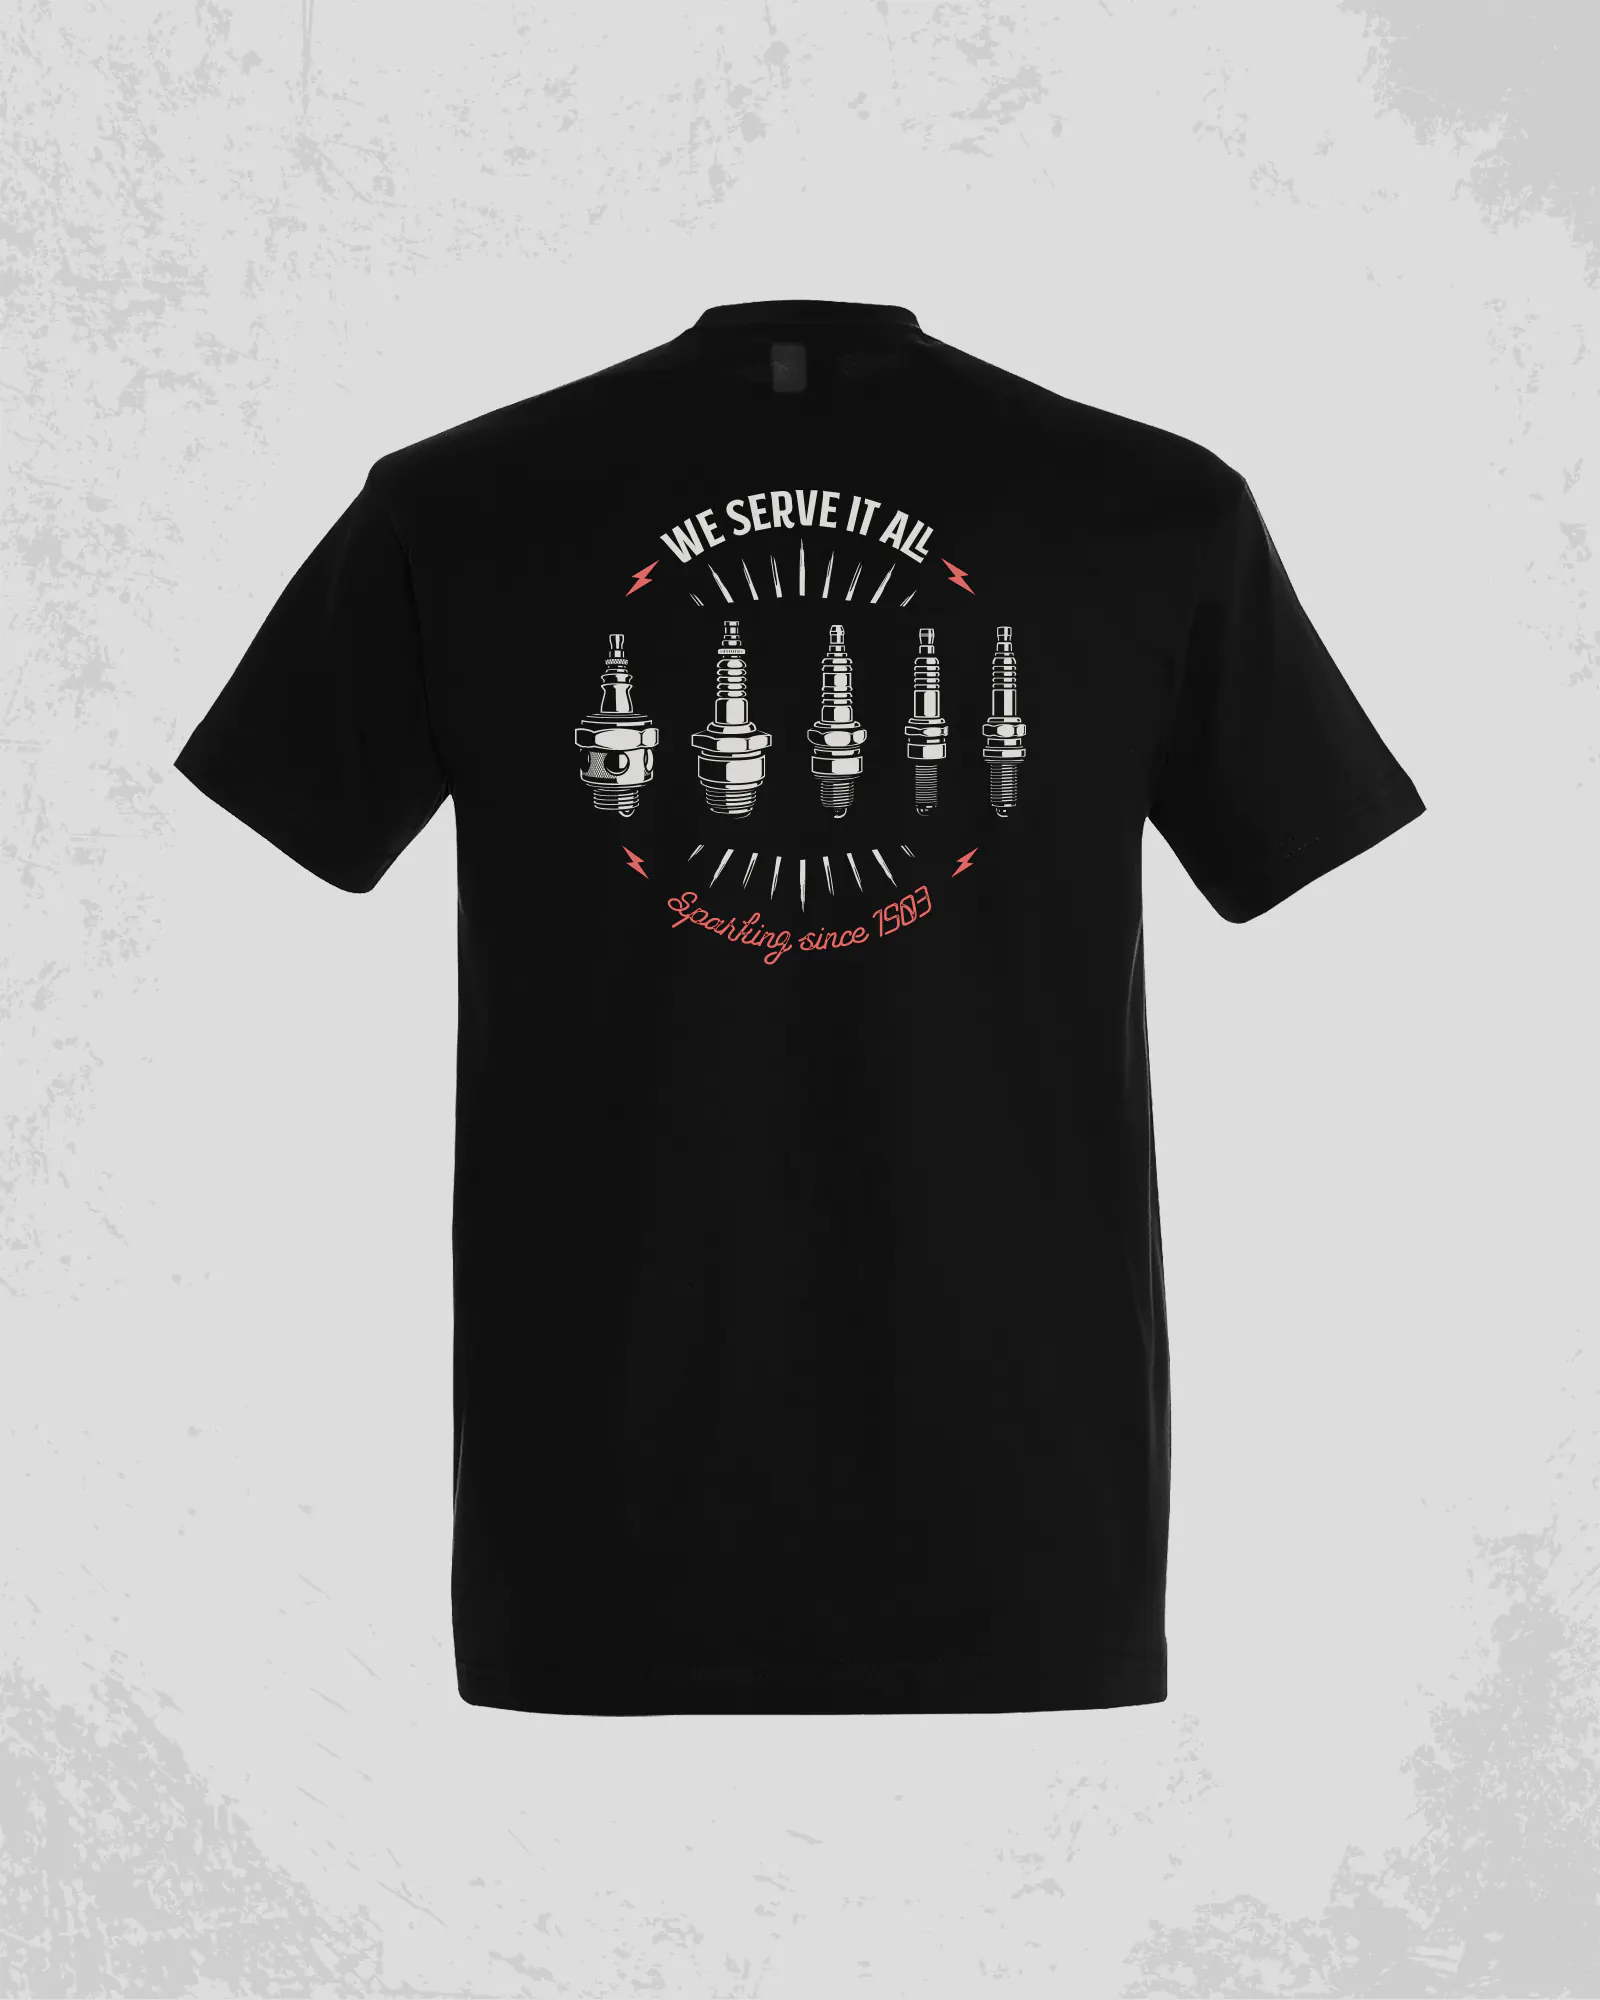 We serve it all - Sparking since 1903 - Merch